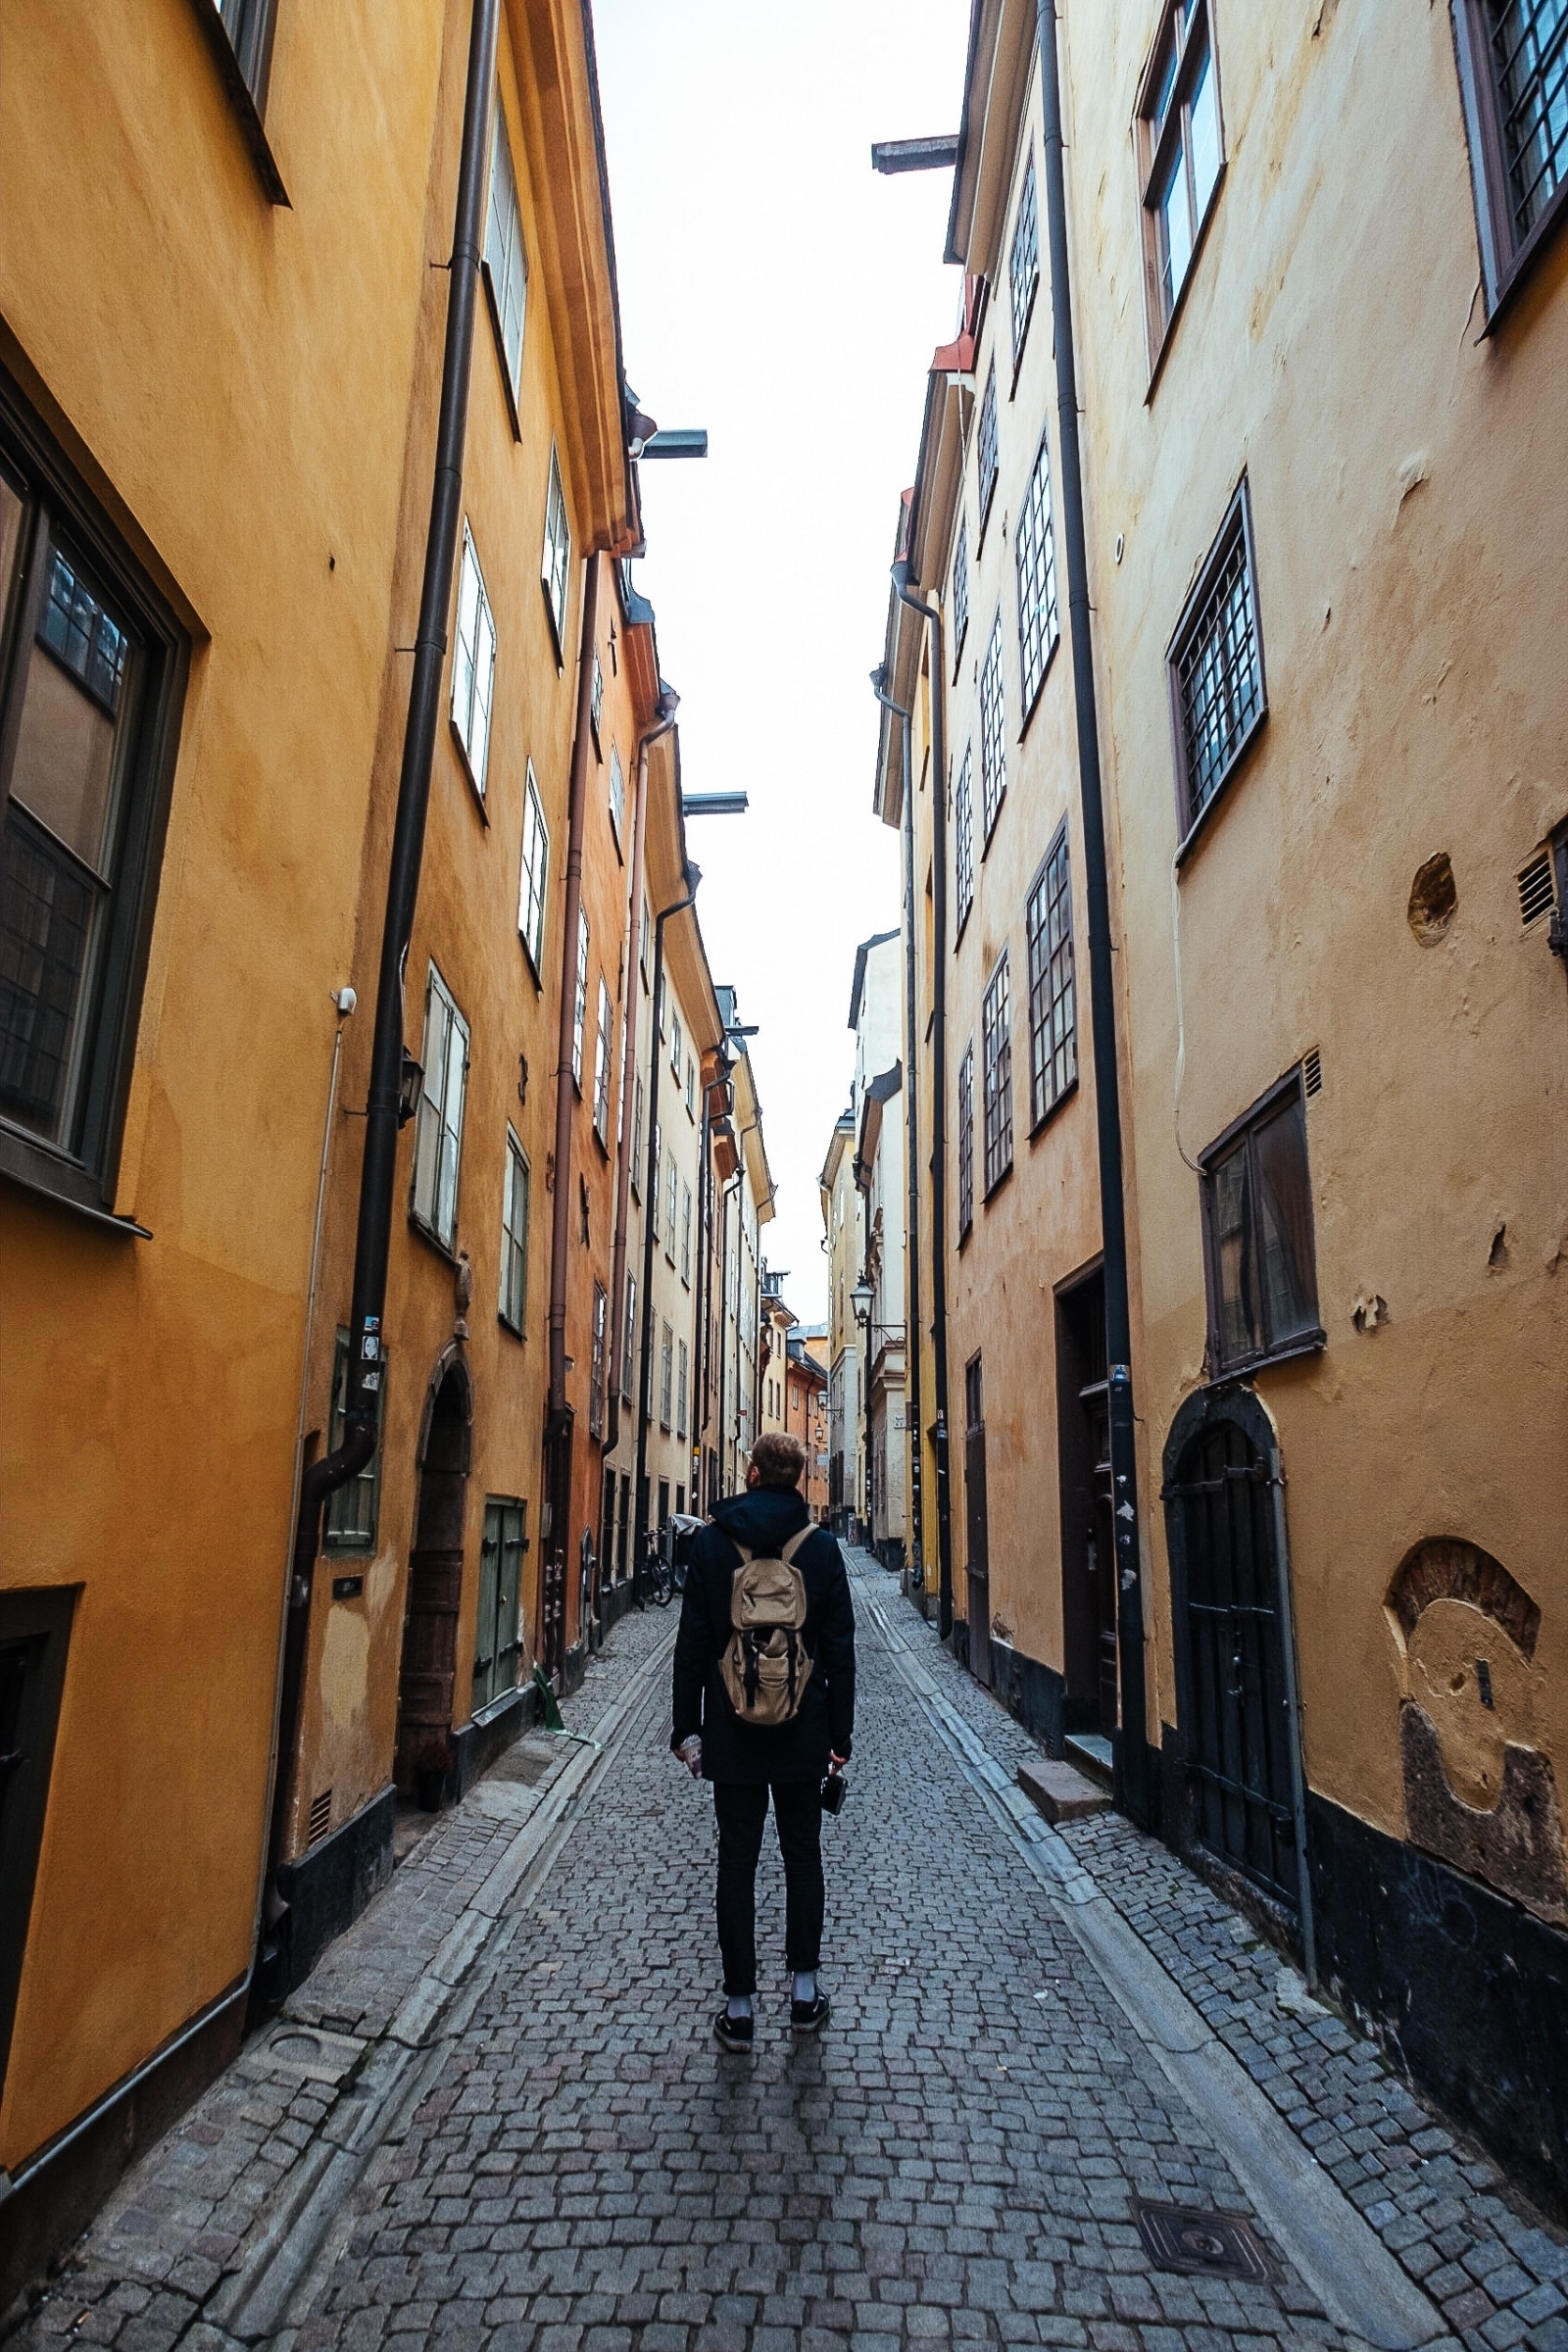 Man with backpack standing in narrow alley street in Old Town Stockholm